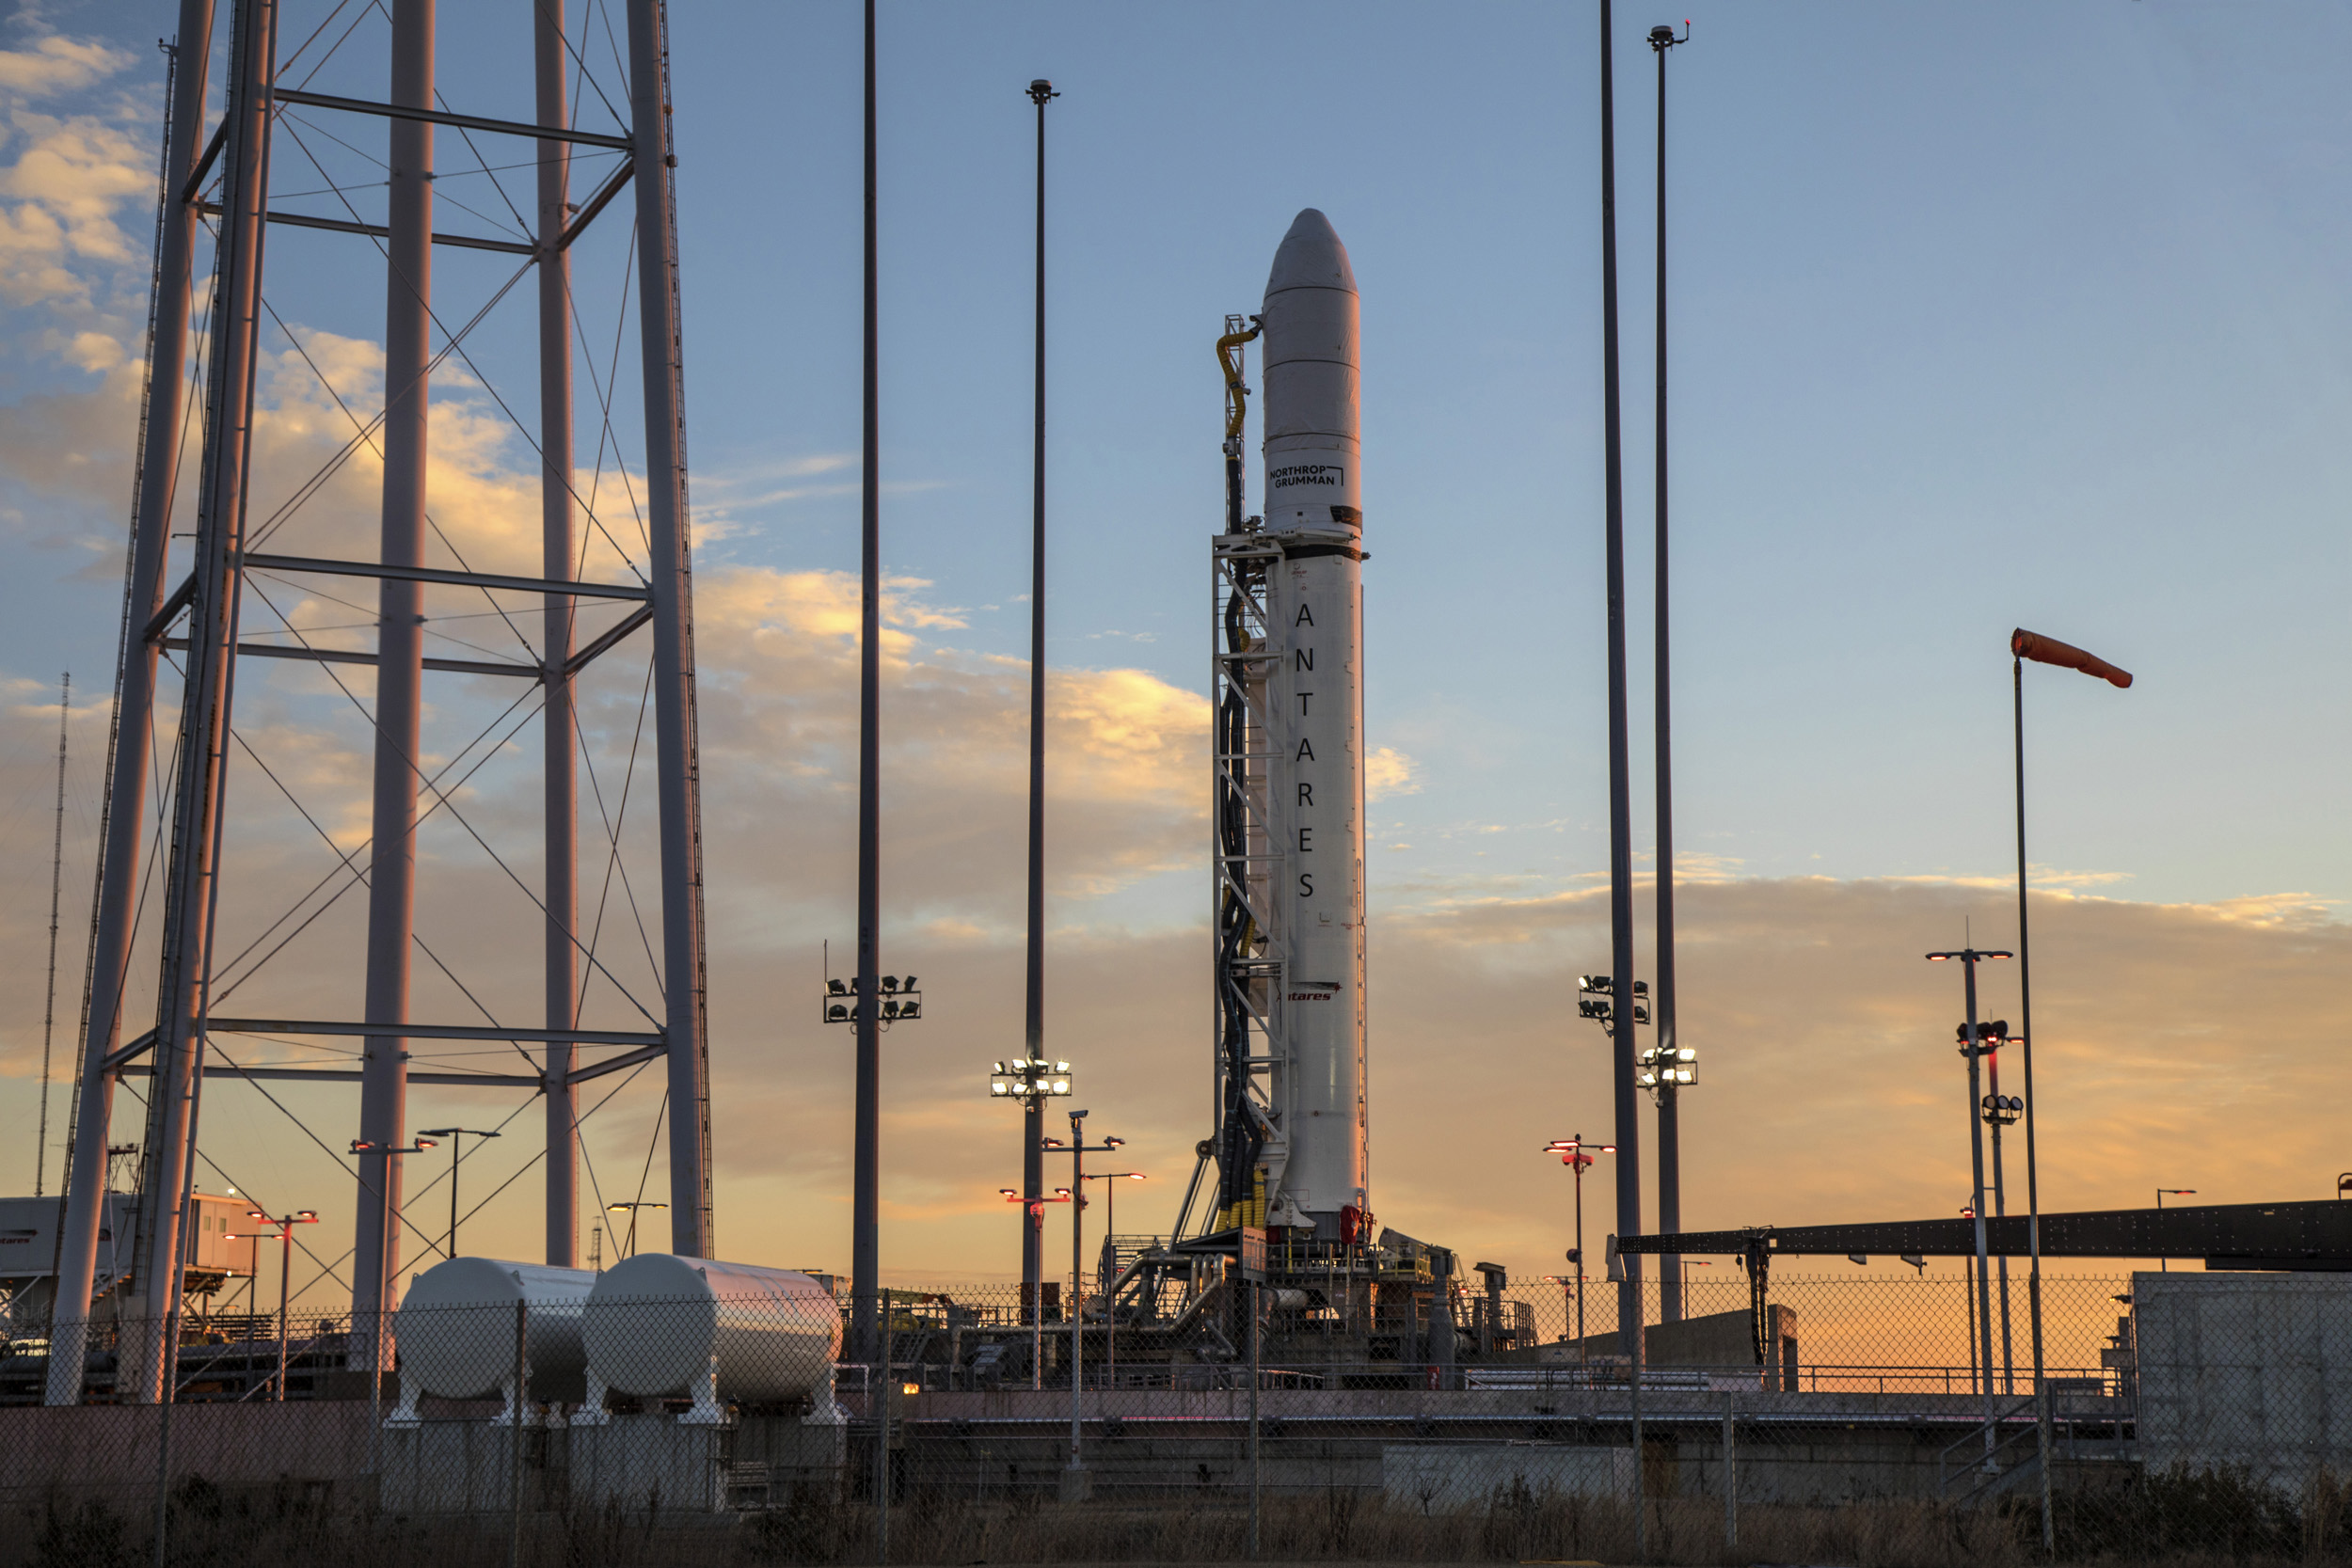 A rocket on launch pad at sunrise in front of a partial blue lit sky as sun comes up